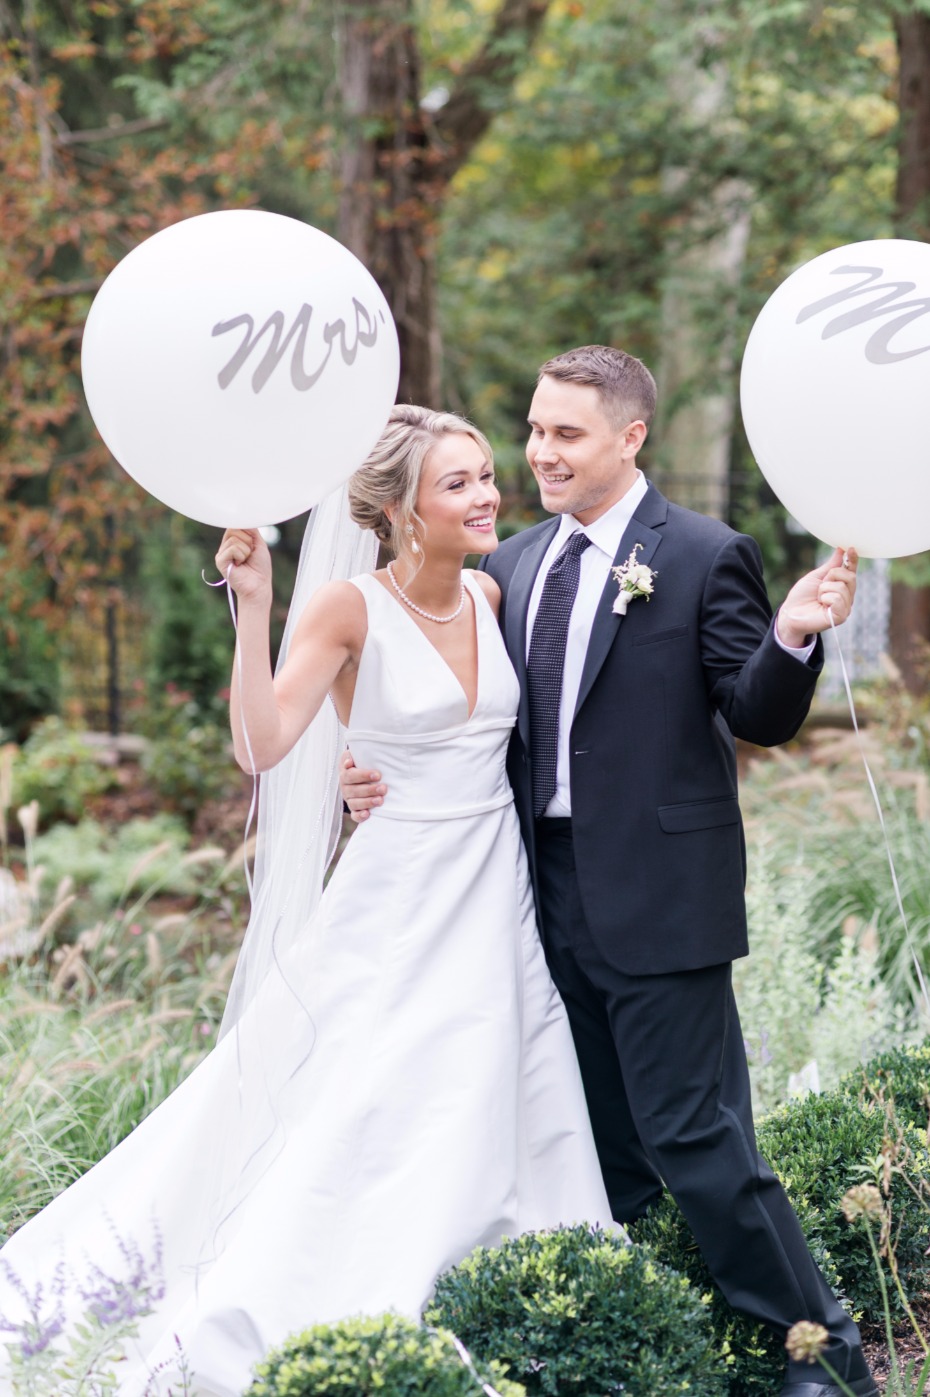 very cute bride and groom photo with mr and mrs giant balloons